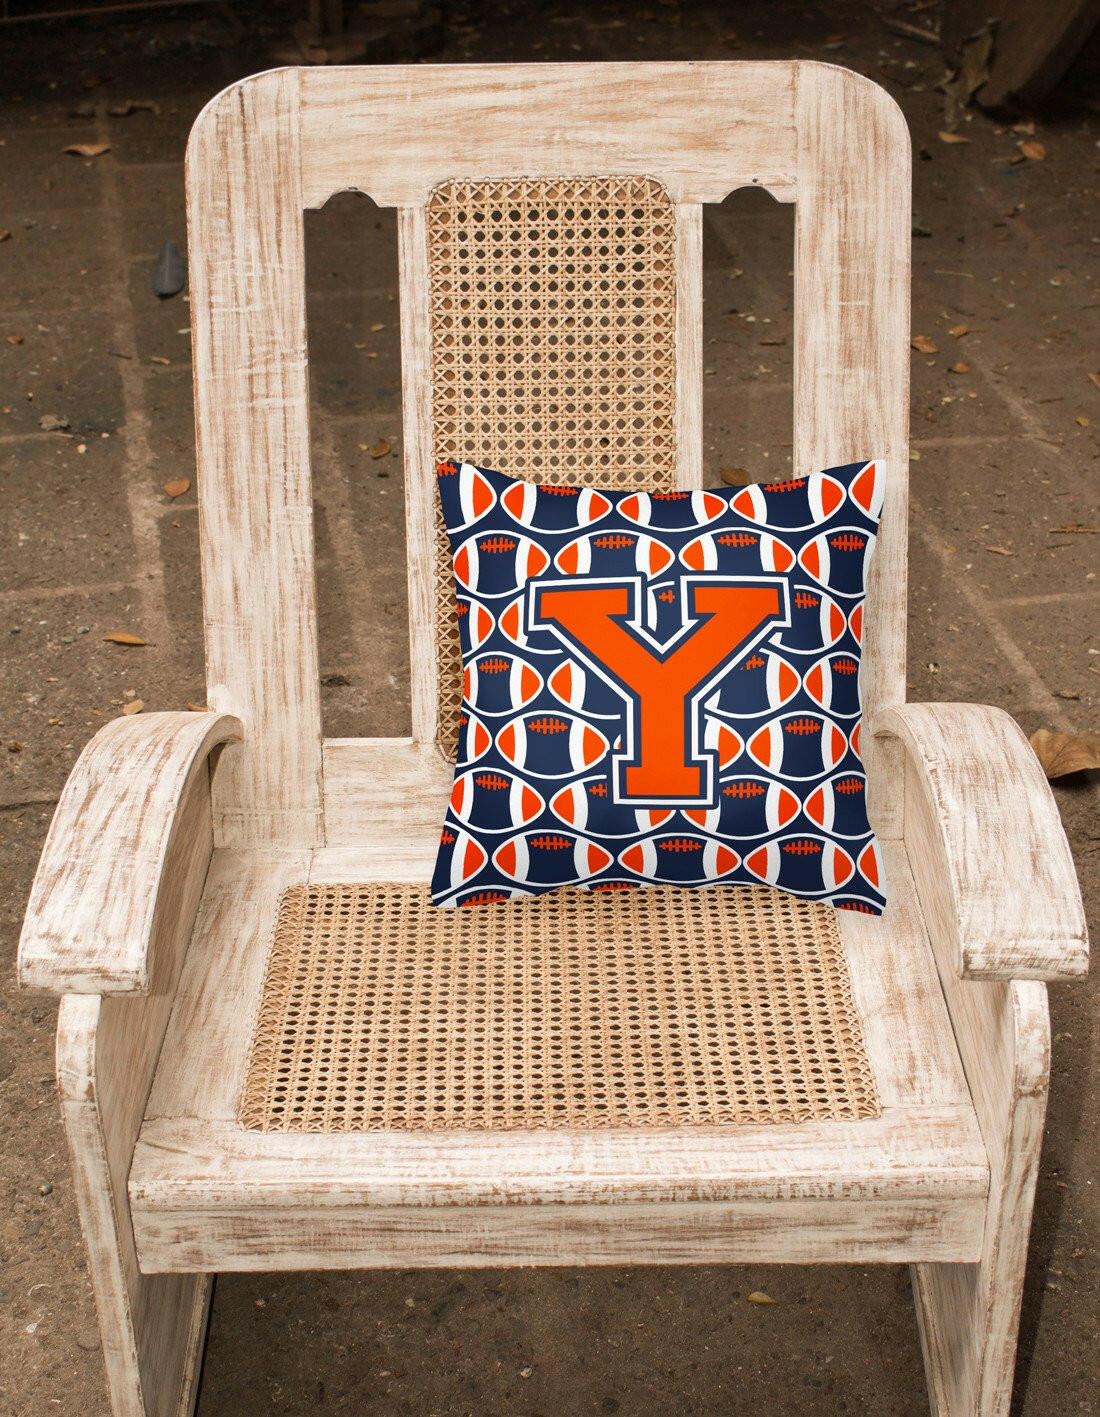 Letter Y Football Orange, Blue and white Fabric Decorative Pillow CJ1066-YPW1414 by Caroline's Treasures